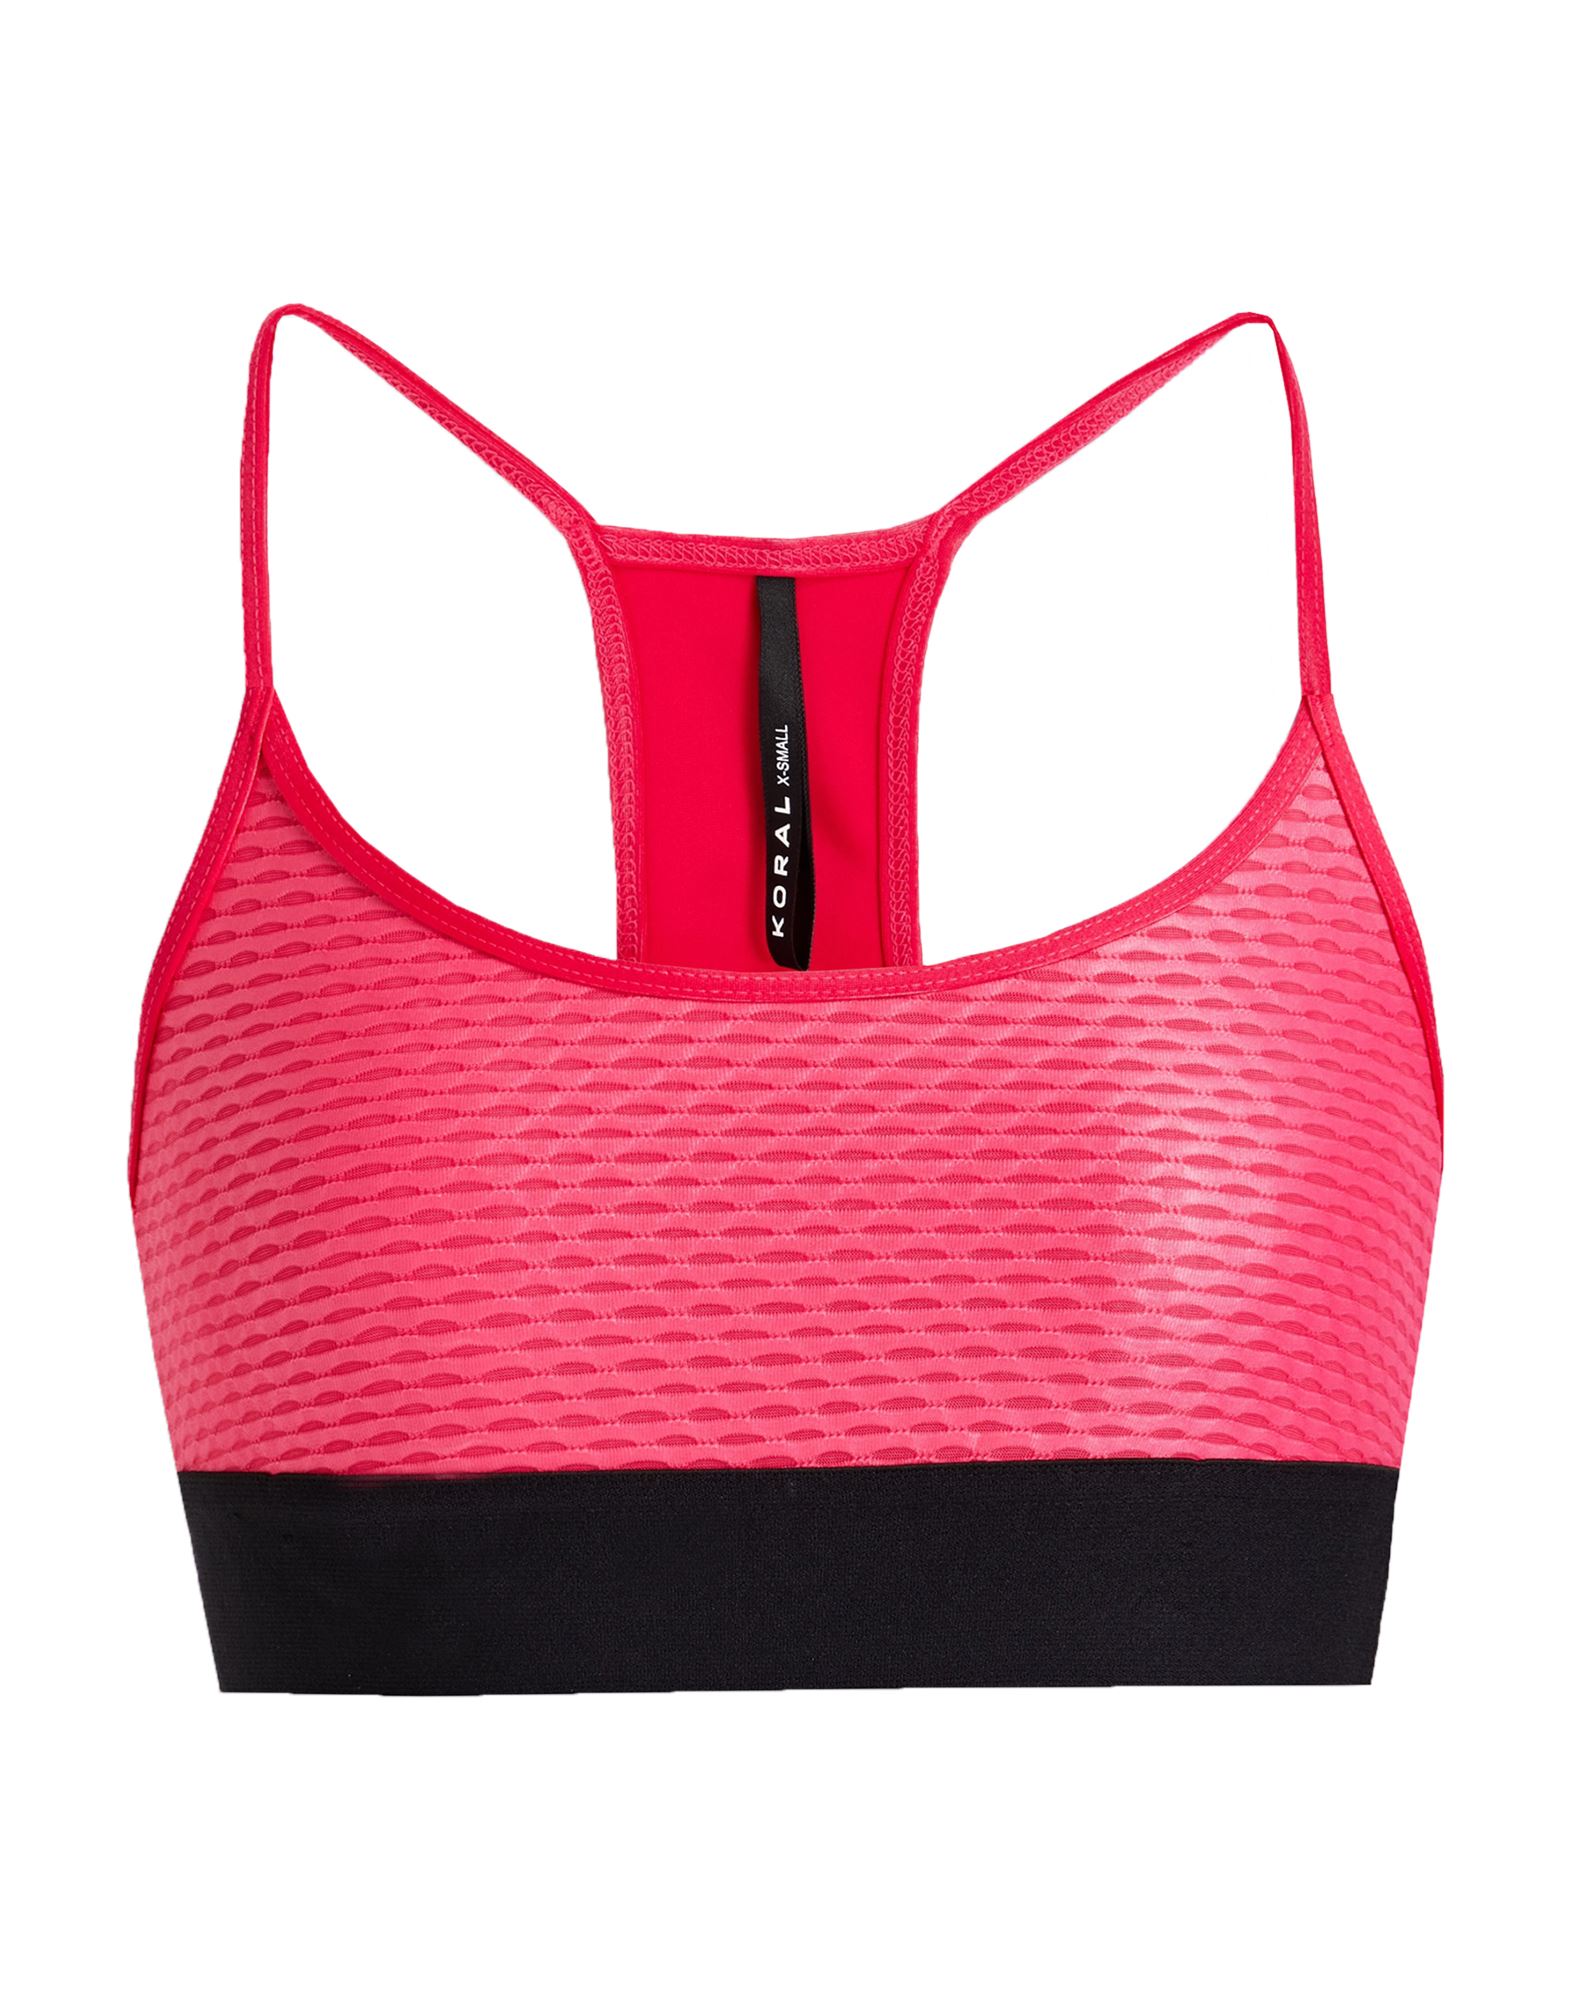 Nike Sports Bra Pink - $15 (57% Off Retail) - From leah